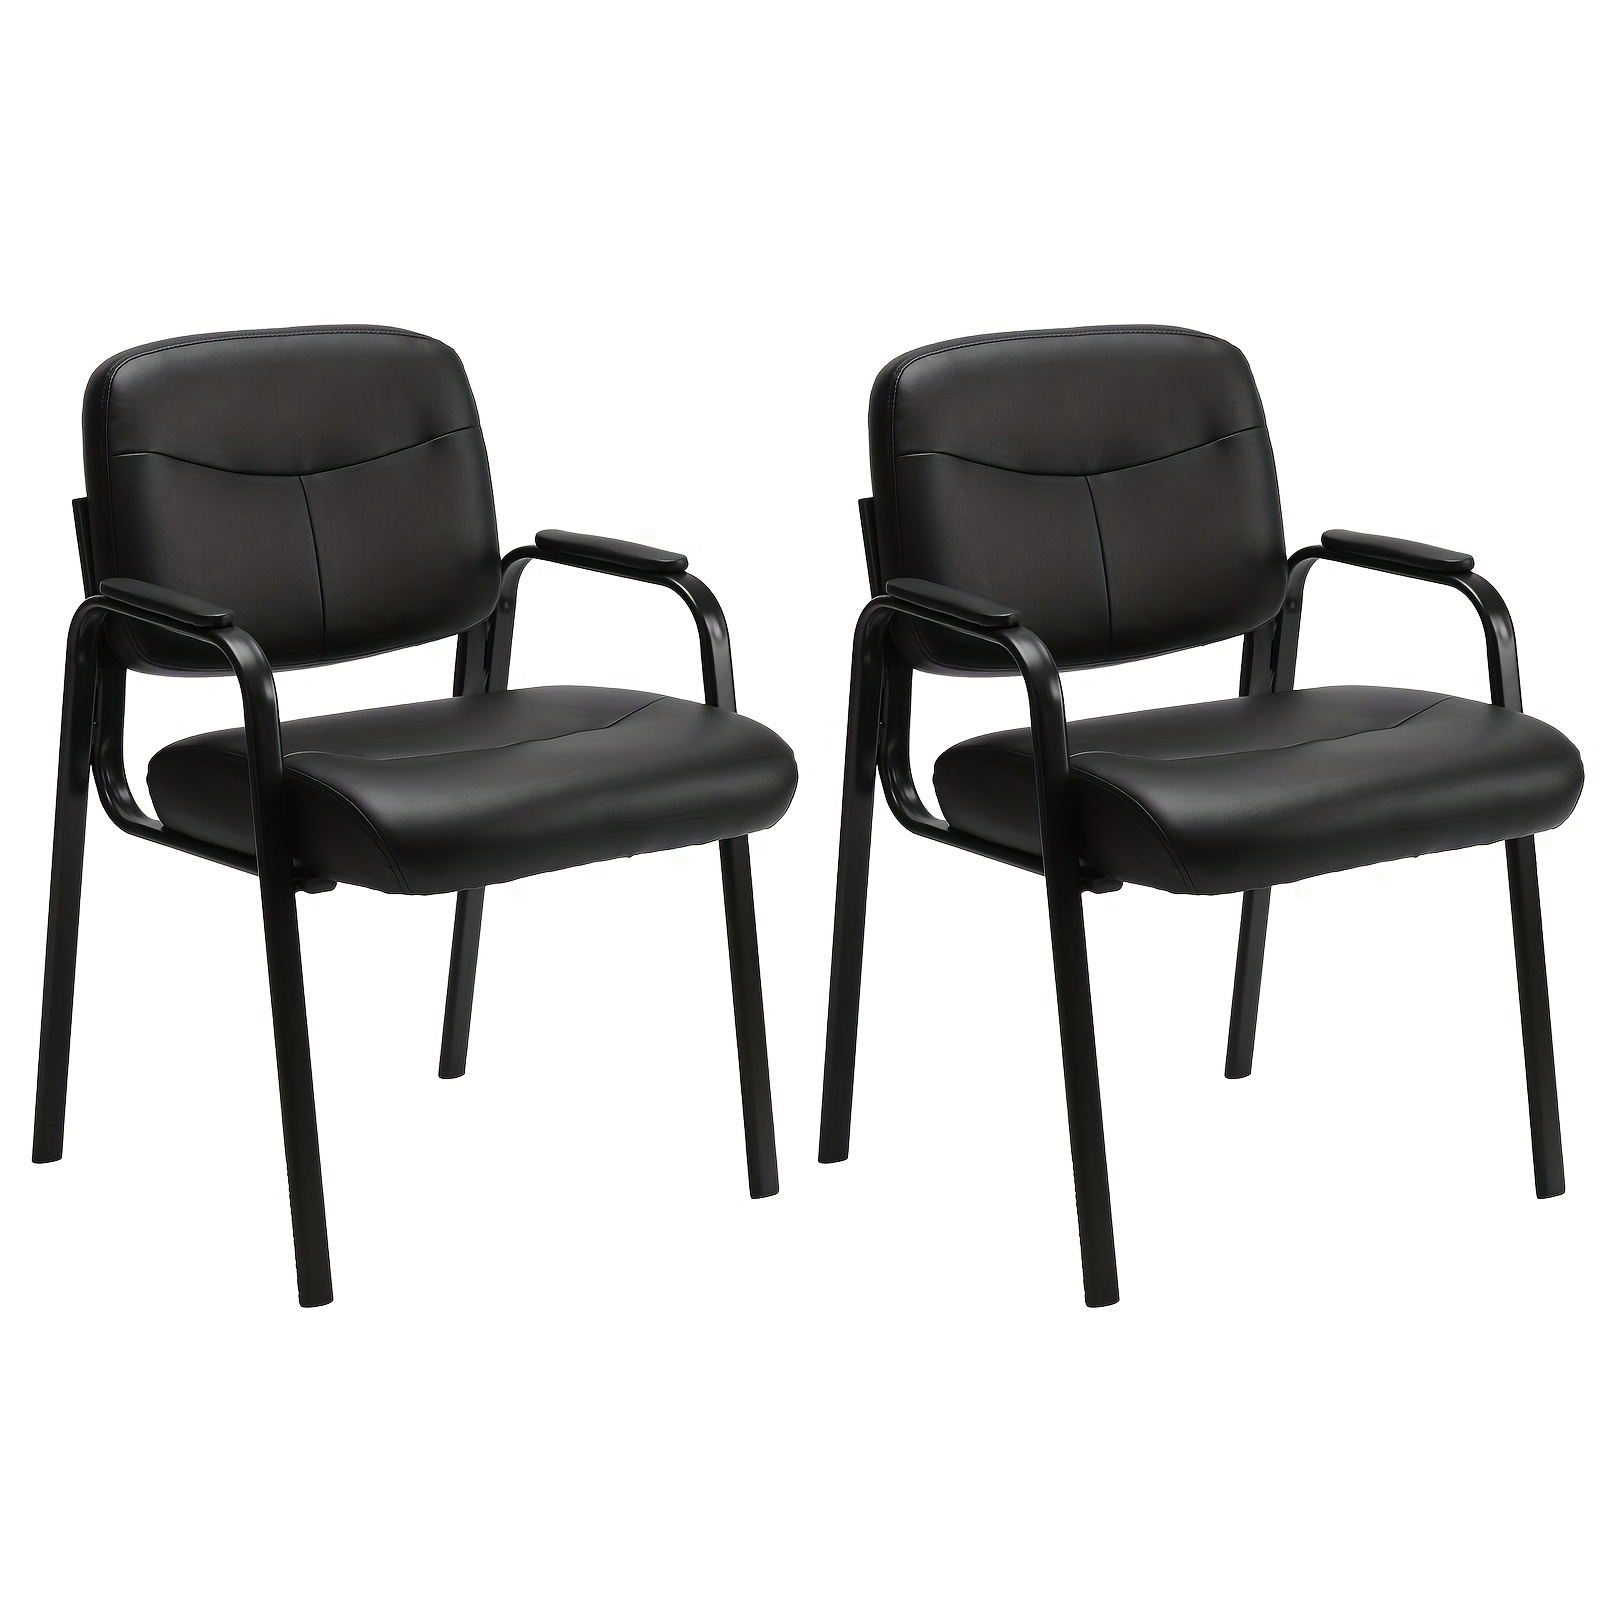 

Guest Chairs- Set Of 2 Chair, Reception Chair With Padded Arms Pu Leather Conference Room Chair Desk Chair Without Wheels For Home Office